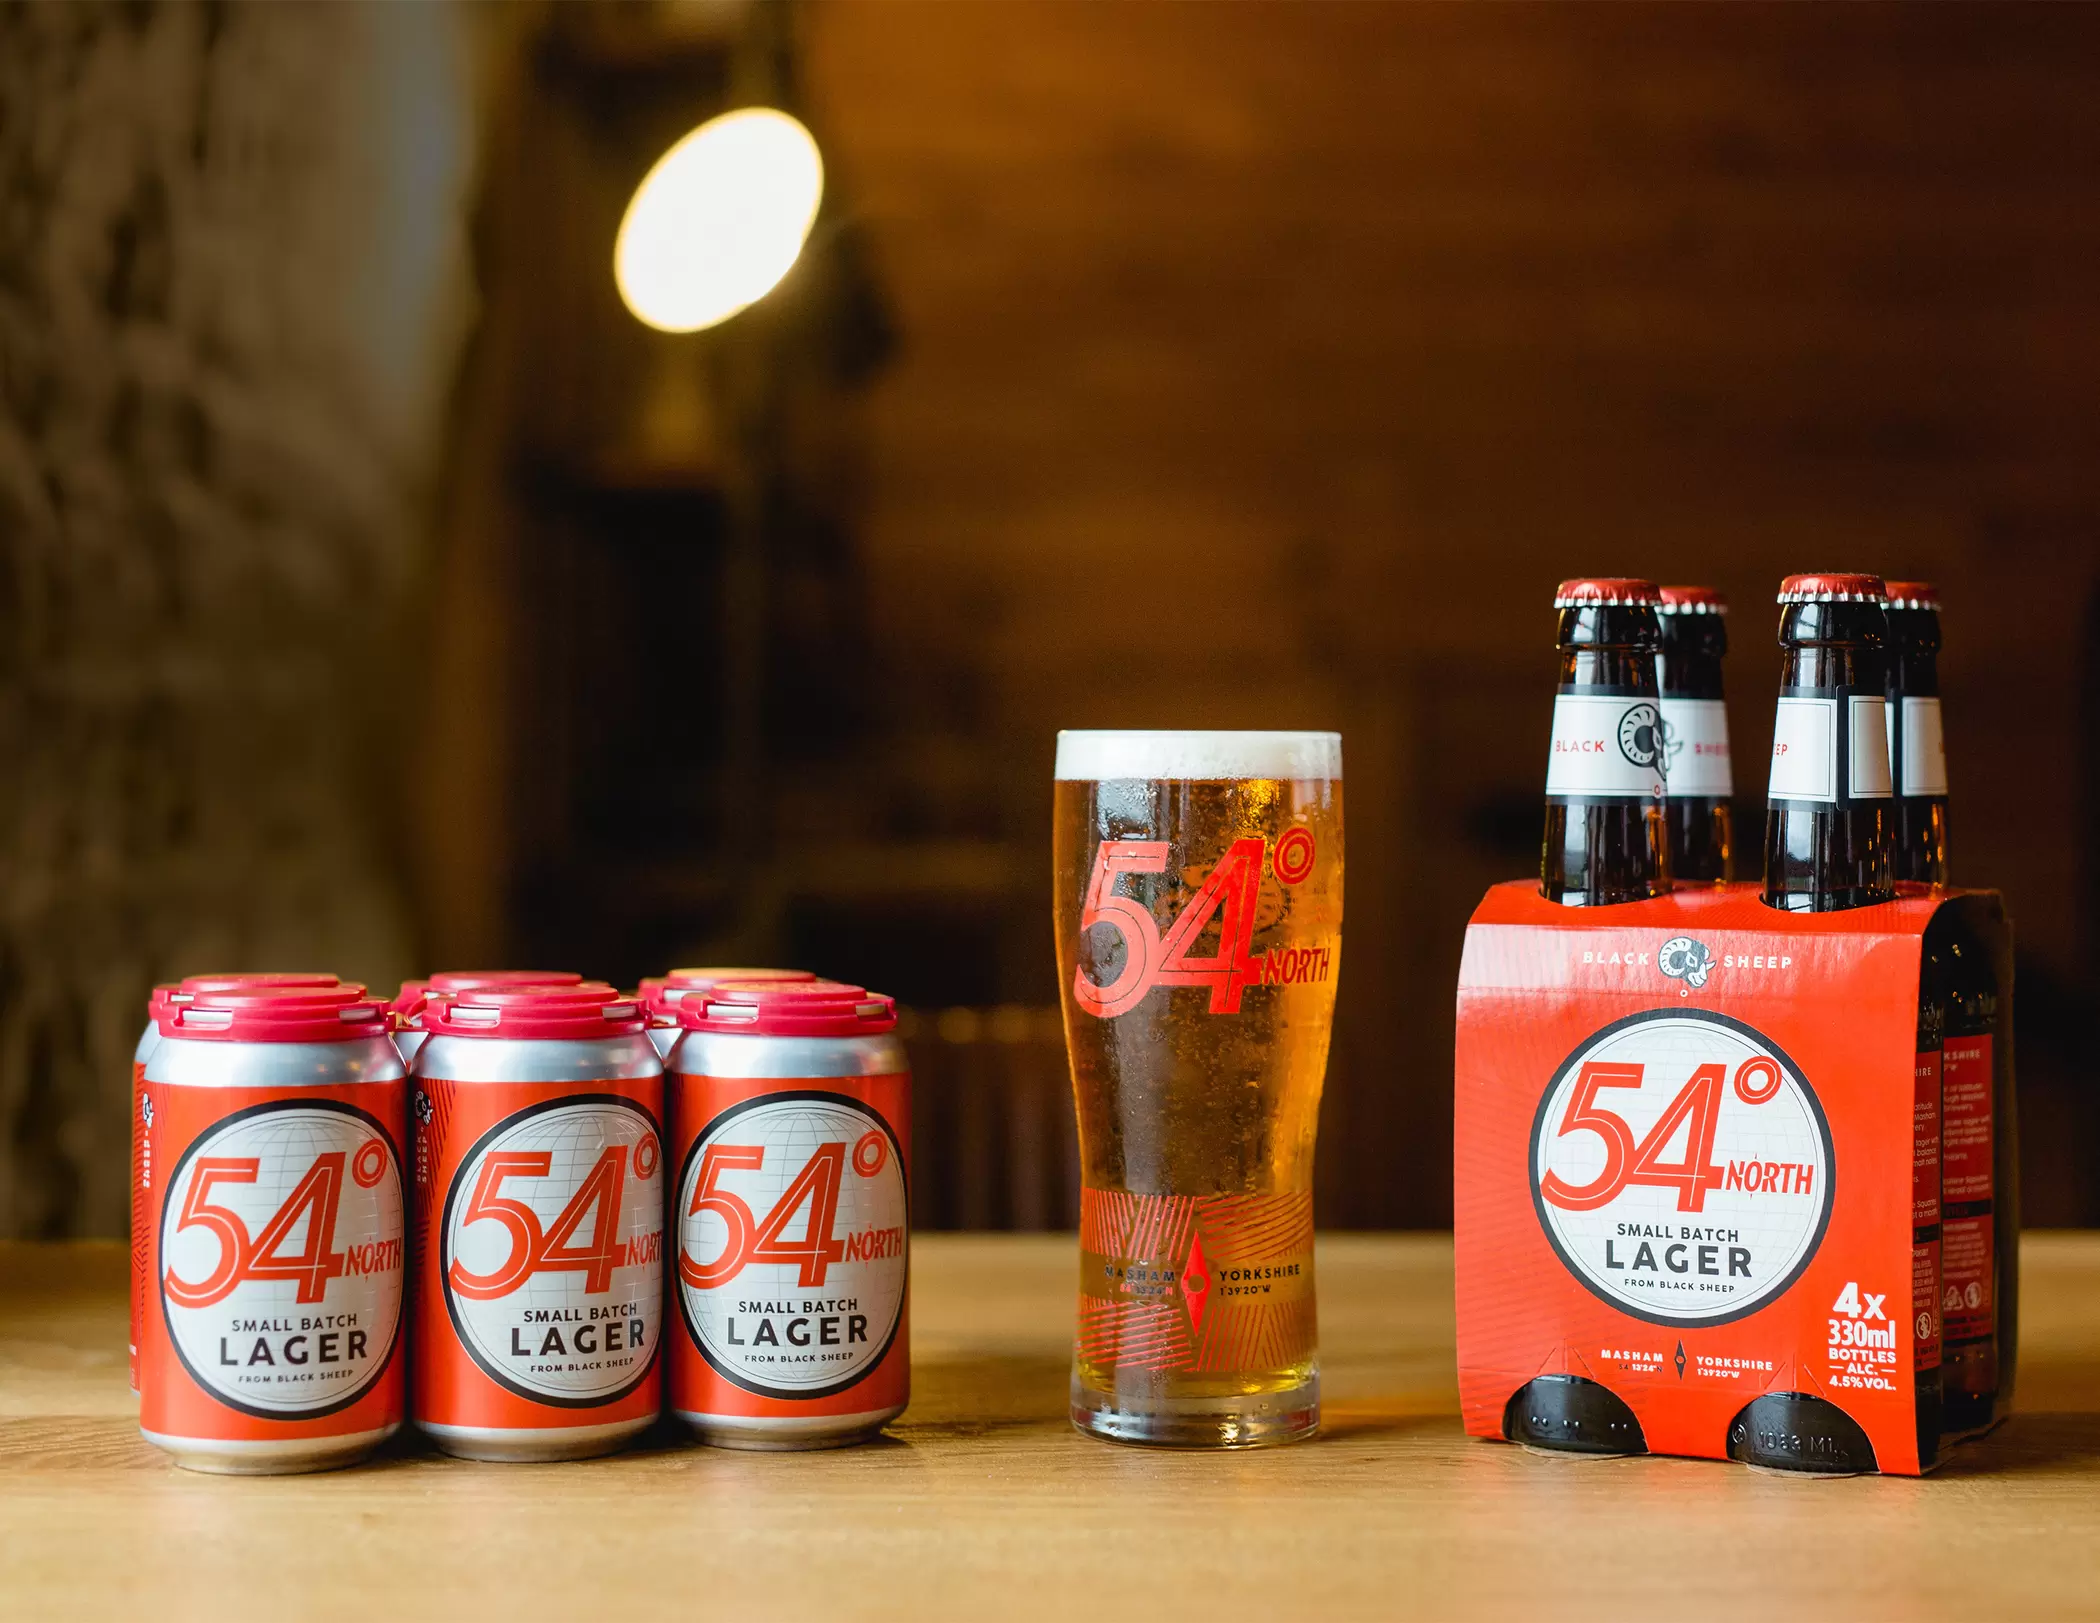 54° North Lager packaging